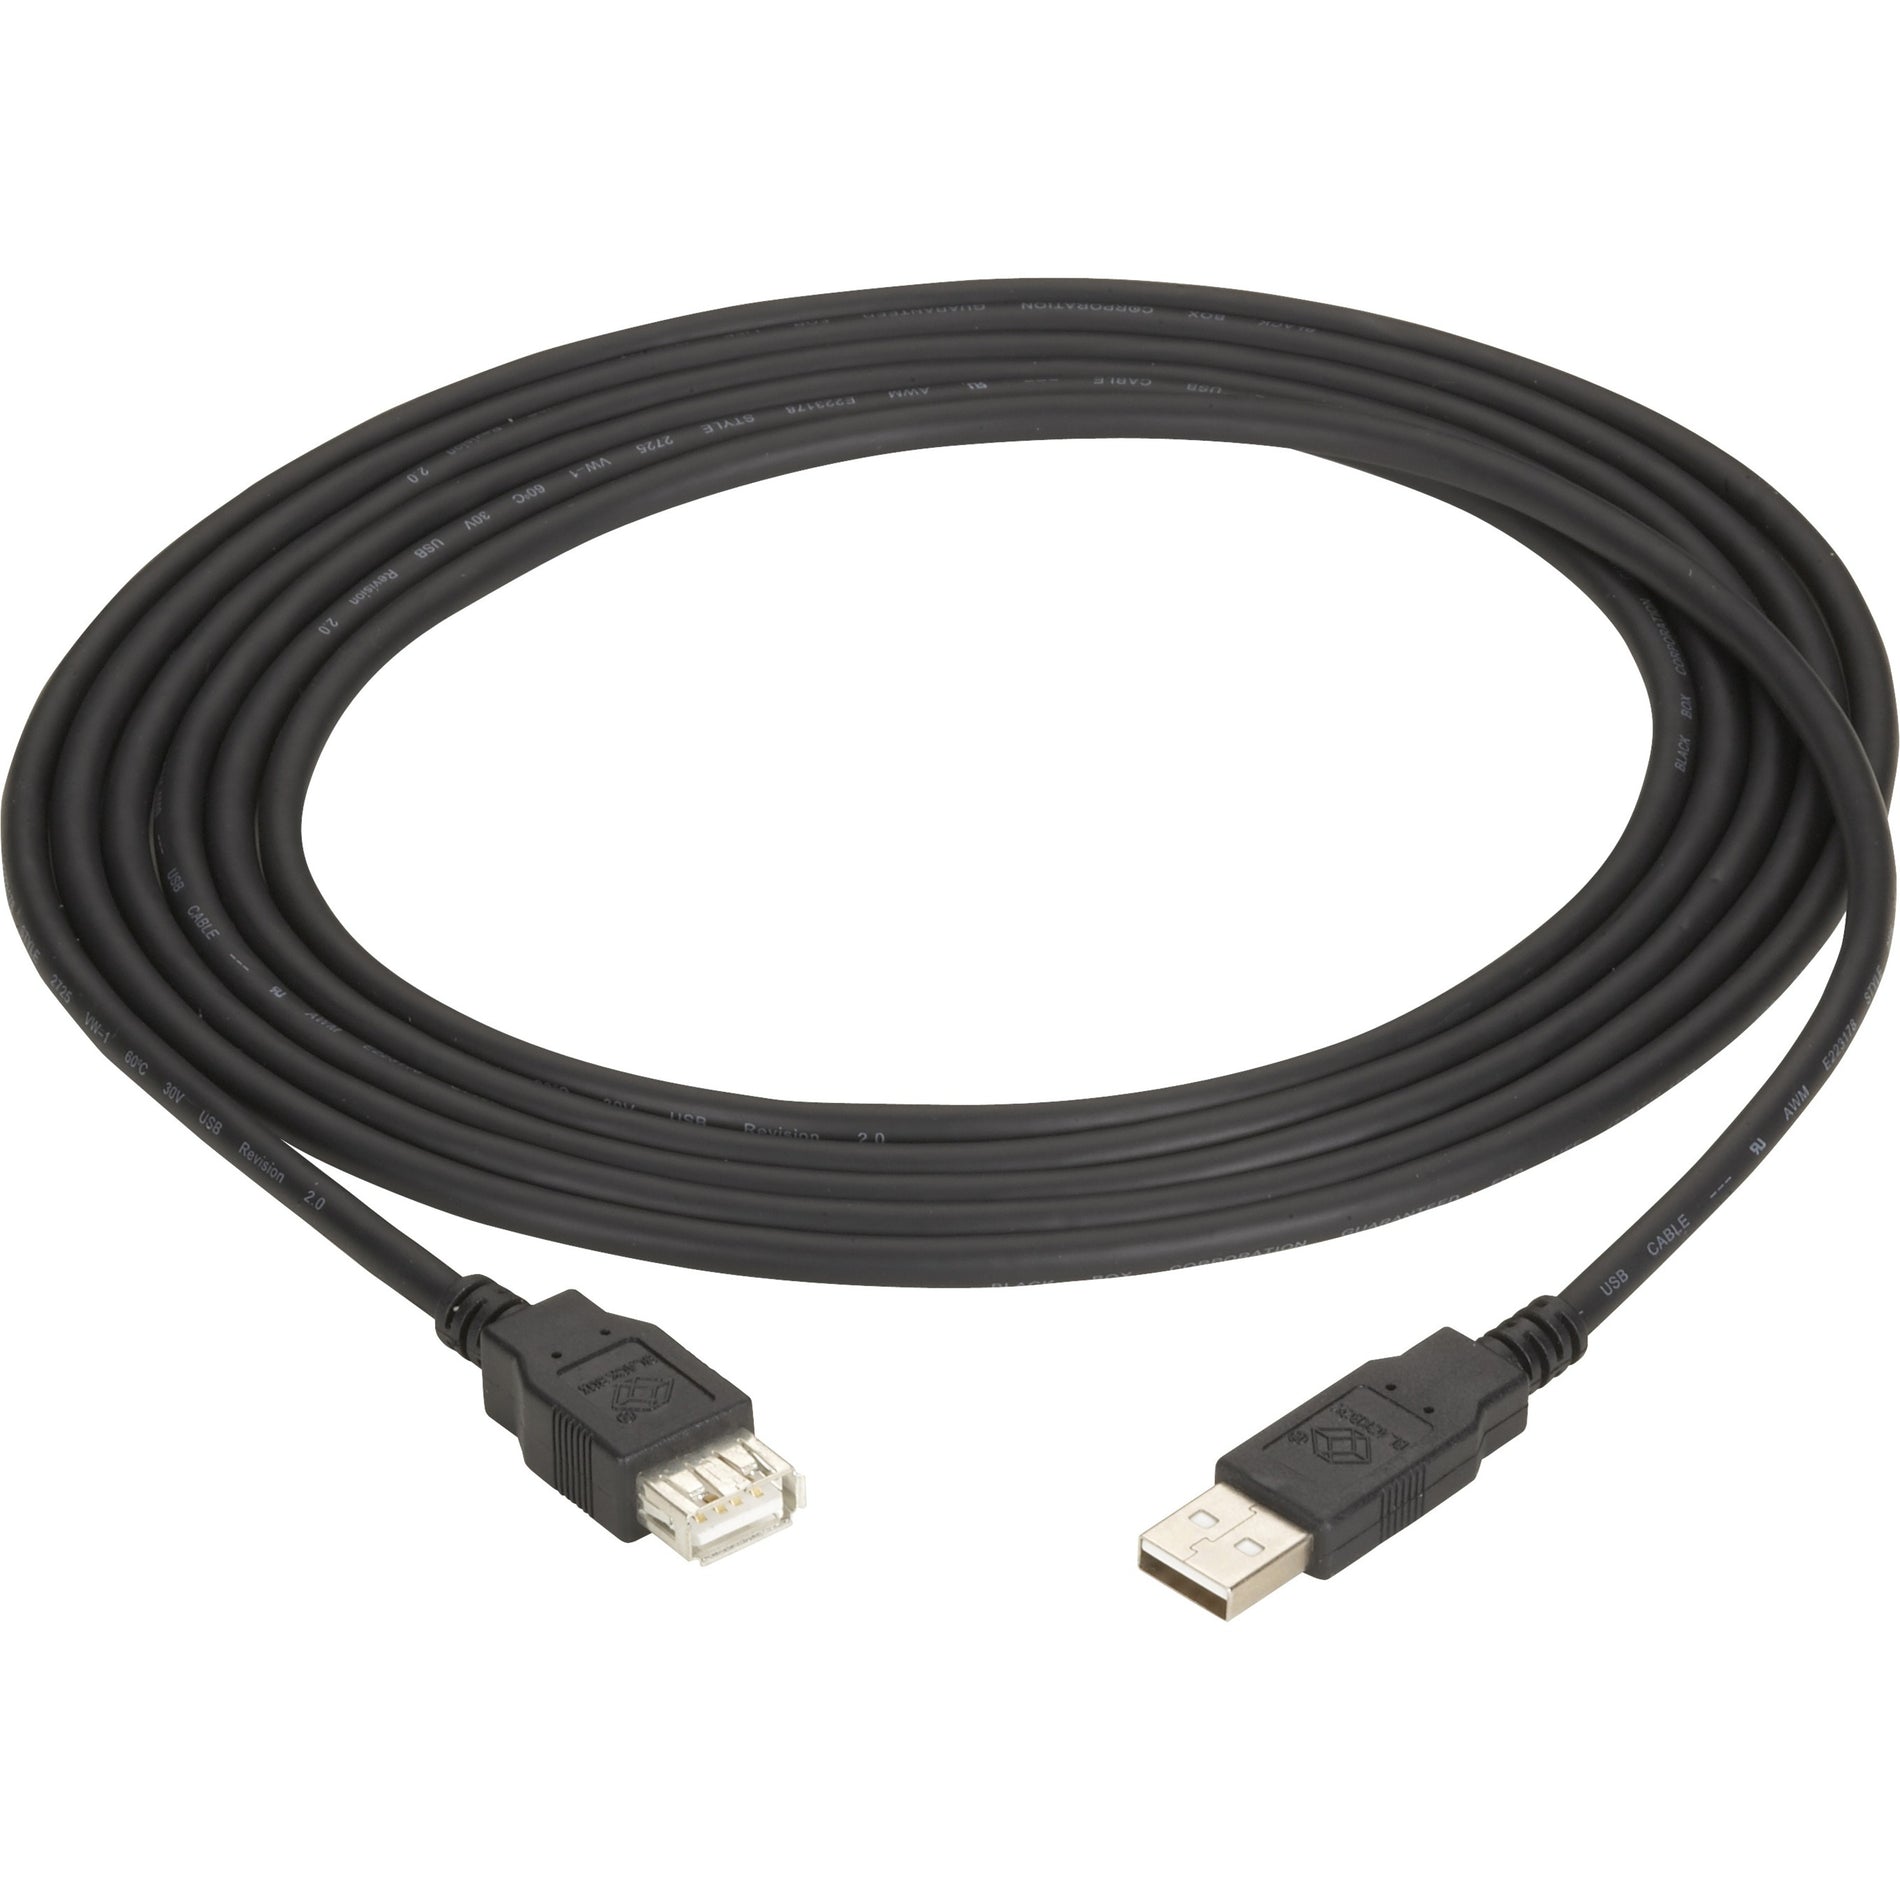 Black Box USB05E-0010 USB 2.0 Extension Cable Type A Male to Type A Female Black 10-ft., Data Transfer Cable